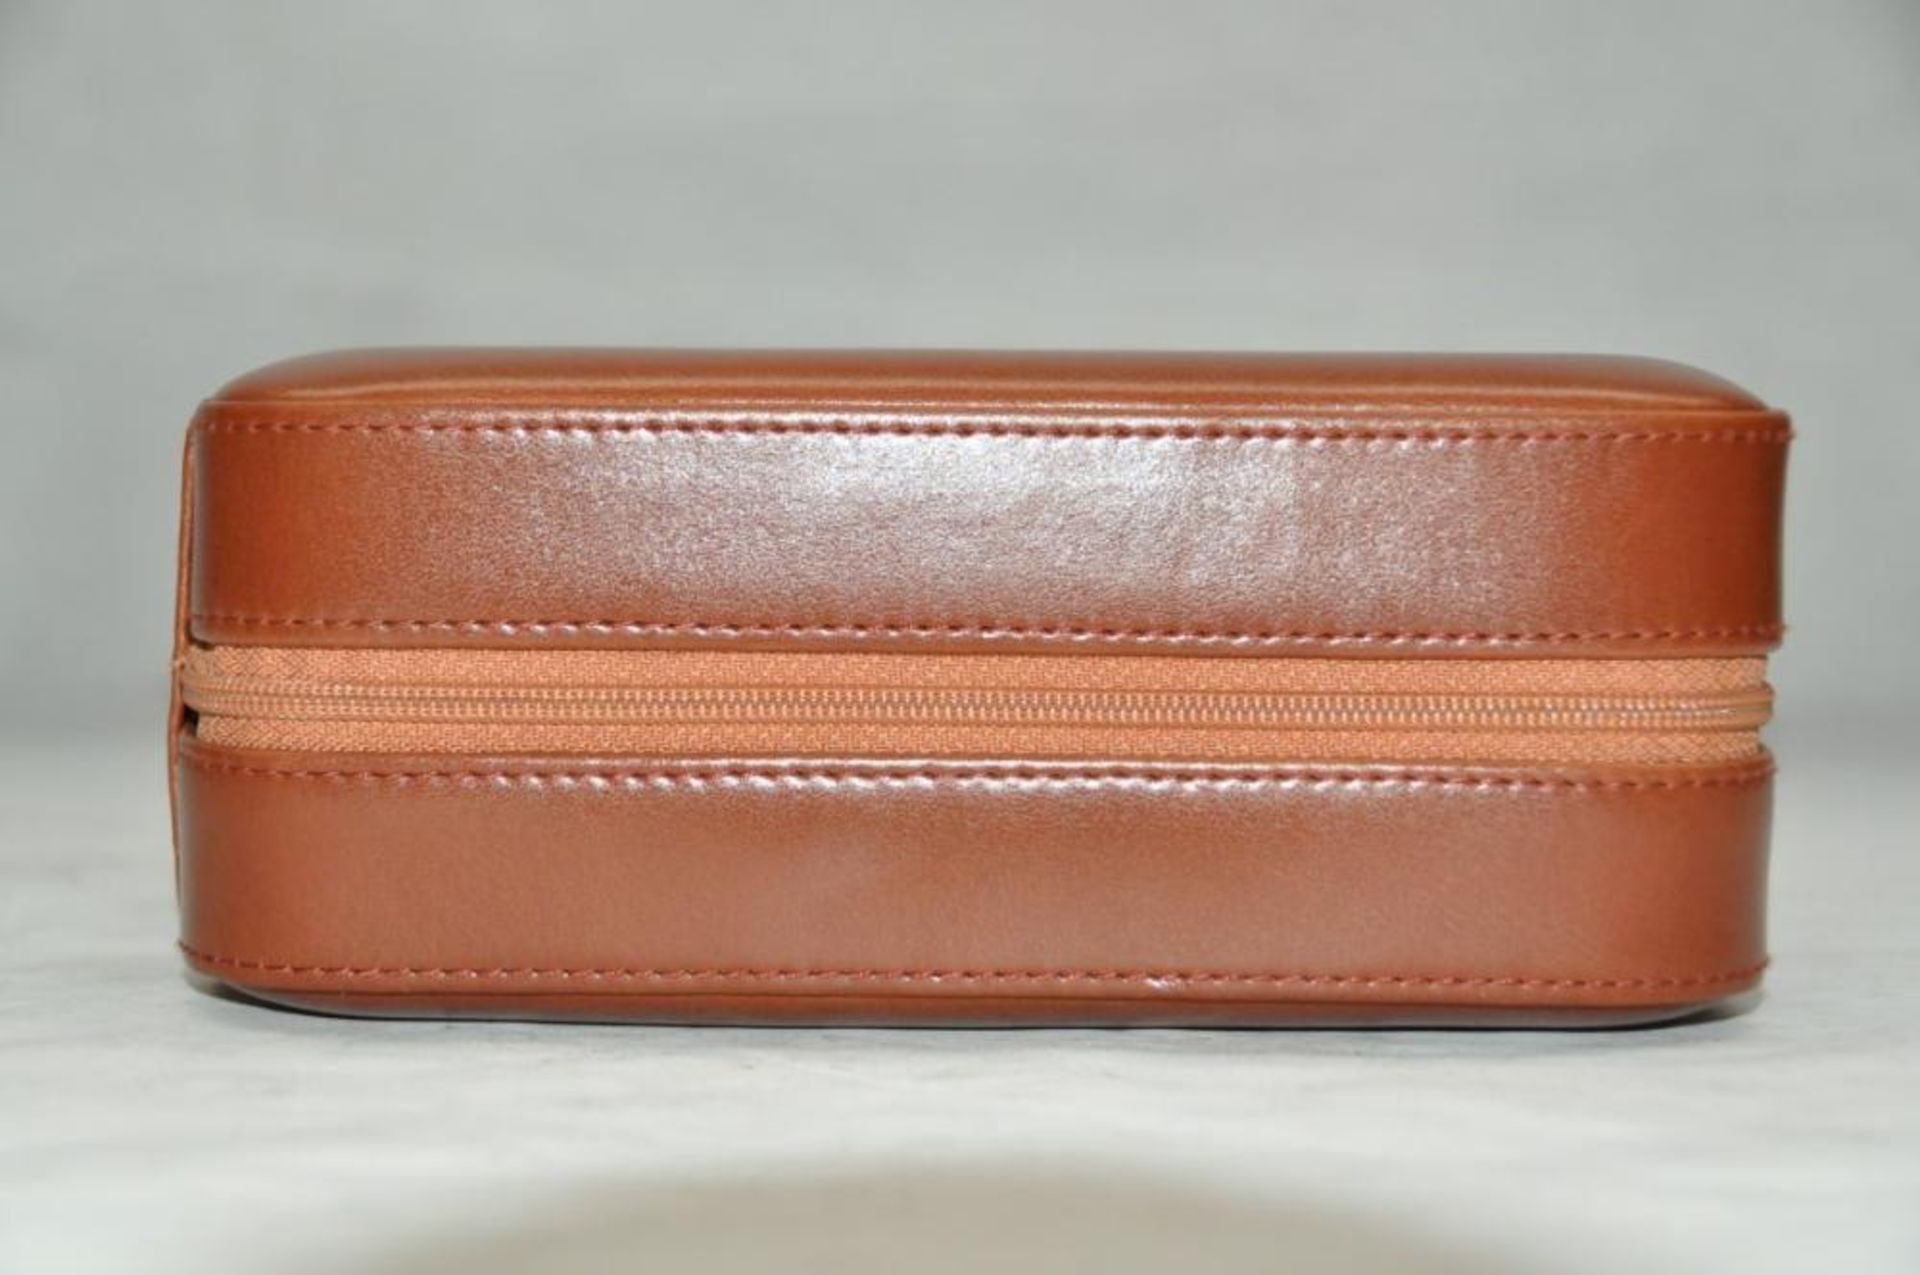 1 x "AB Collezioni" Italian Luxury Leather Zip-Up Watch Case (26985) - Ref LT162 - Features 4 - Image 3 of 6